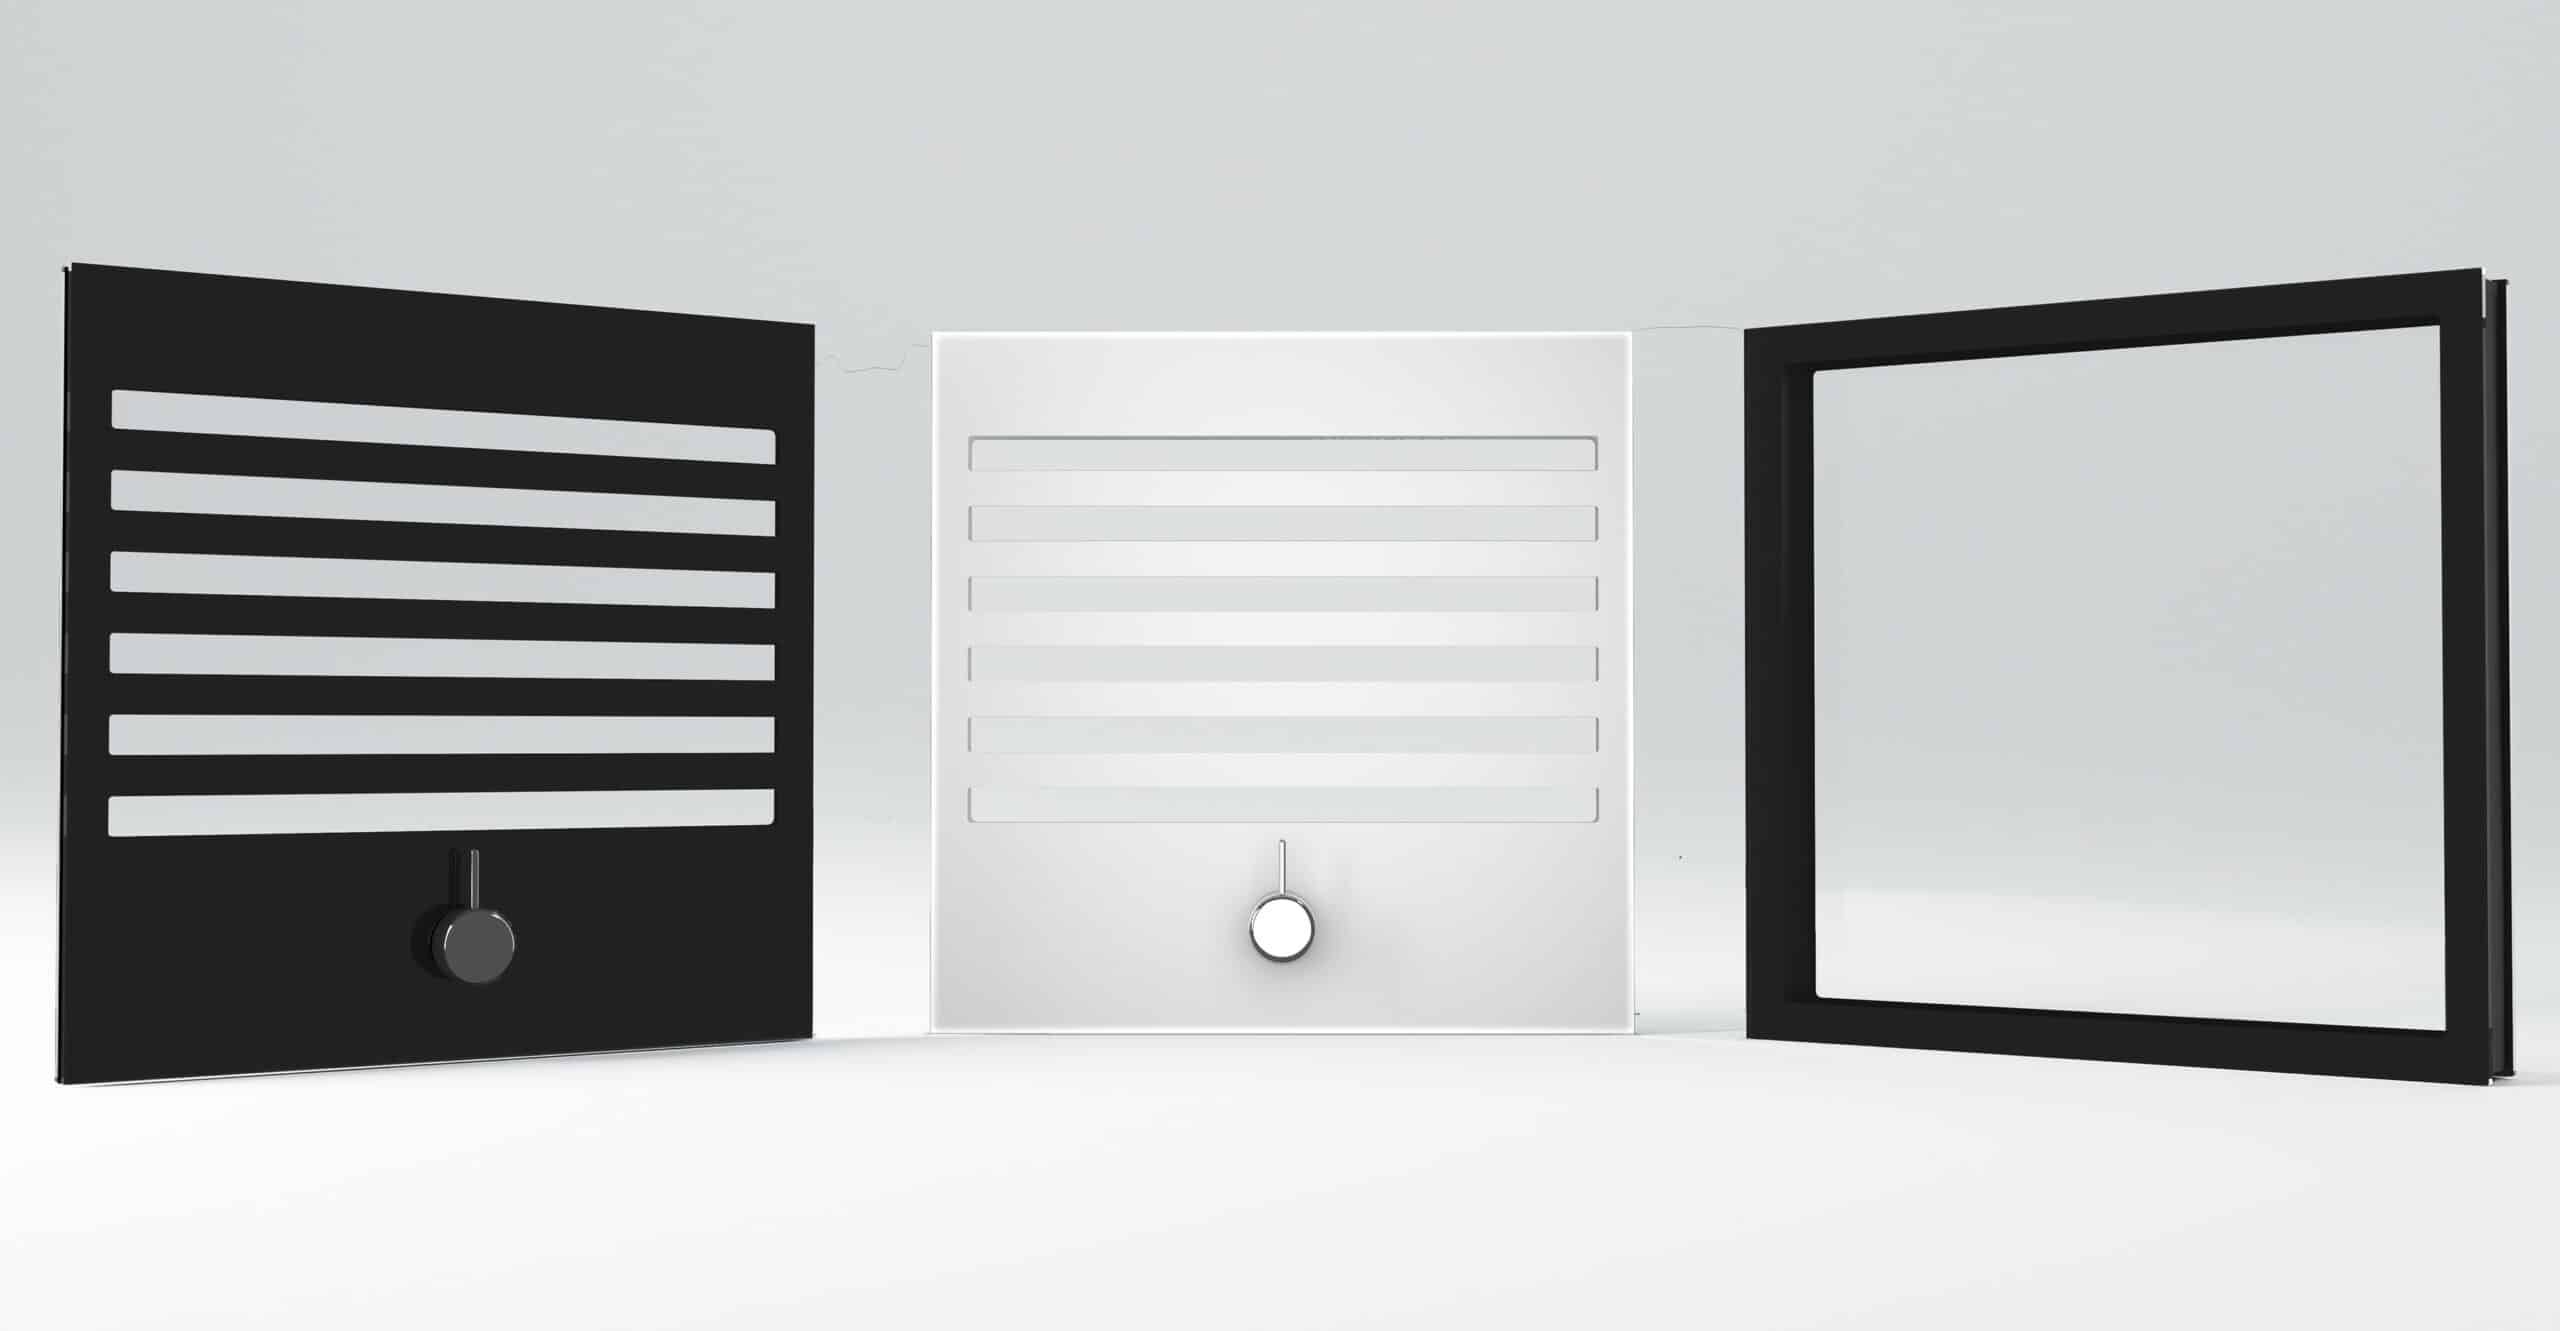 Special-Lite Introduces New Flush Vision Panels for Fiberglass and FRP Doors in Sterile environments